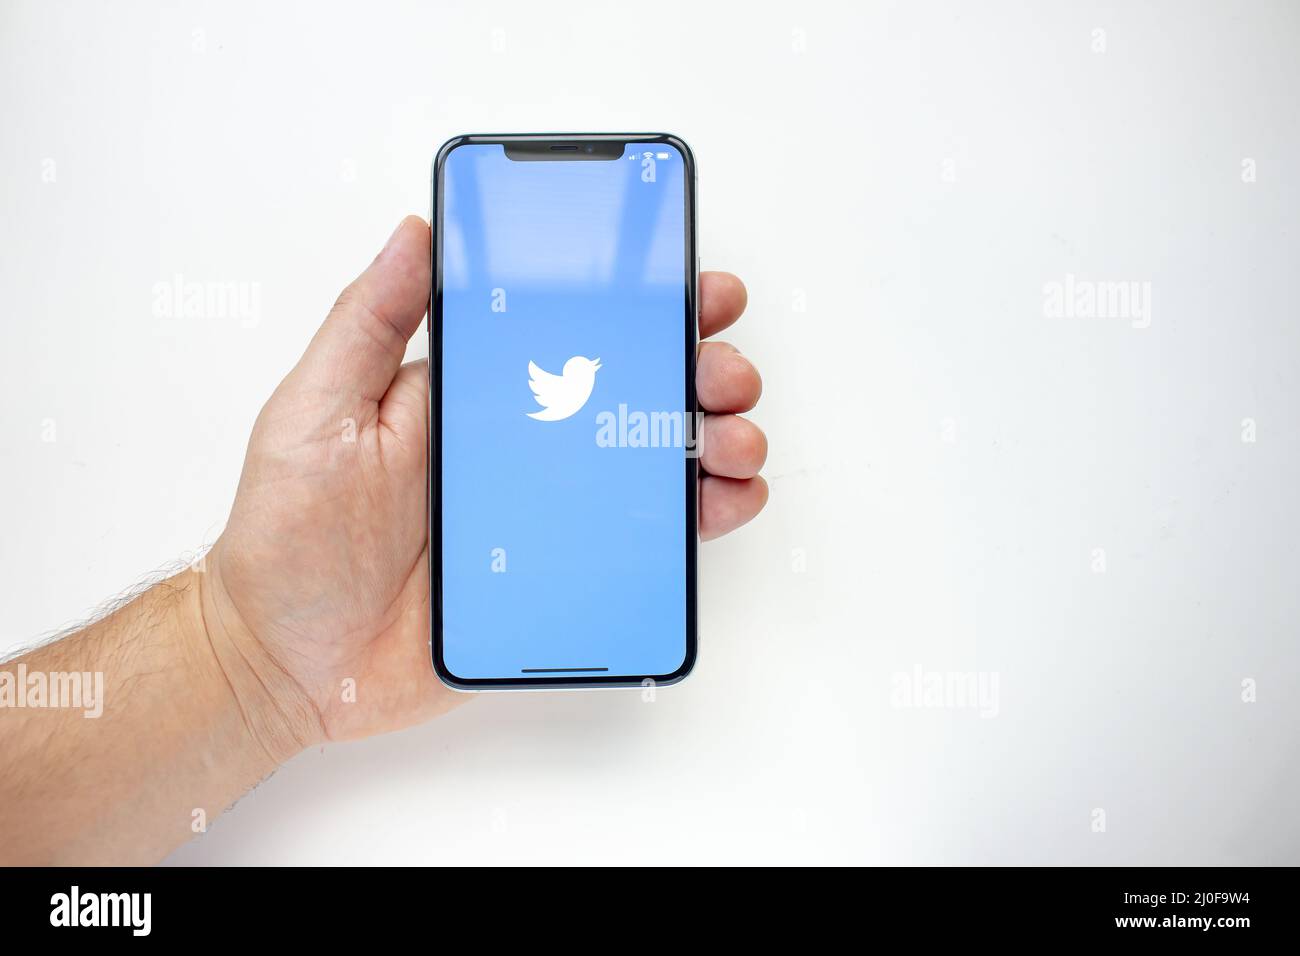 Calgary, Alberta, Canada. Aug 15, 2020. A person holding an iPhone 11 Pro Max with the Twitter App Stock Photo